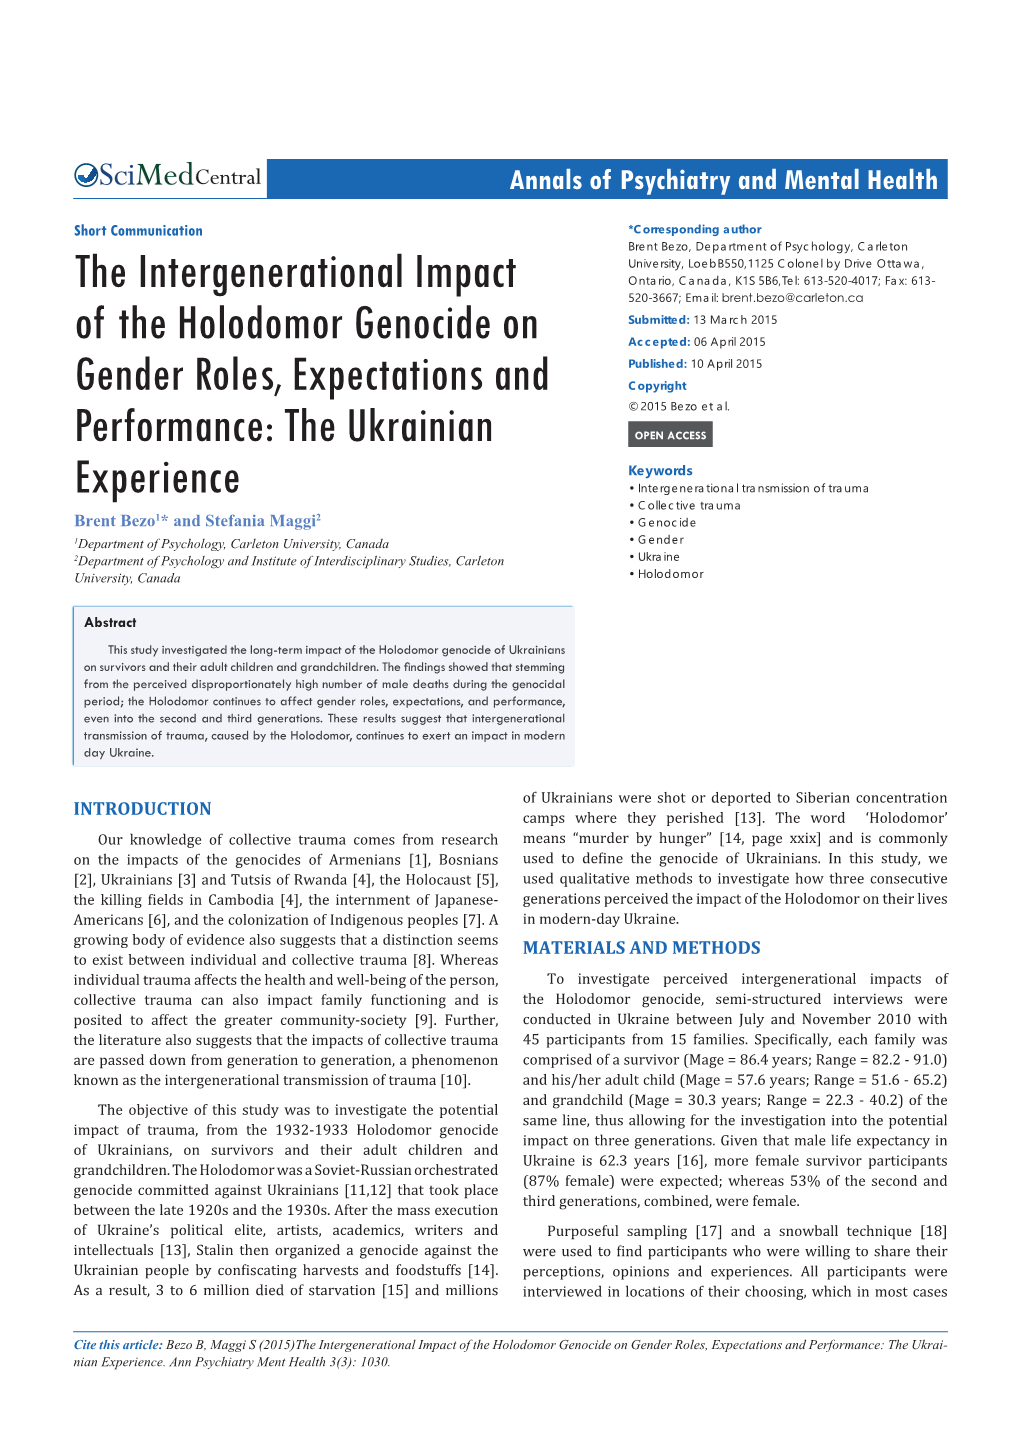 The Intergenerational Impact of the Holodomor Genocide on Gender Roles, Expectations and Performance: the Ukrai- Nian Experience